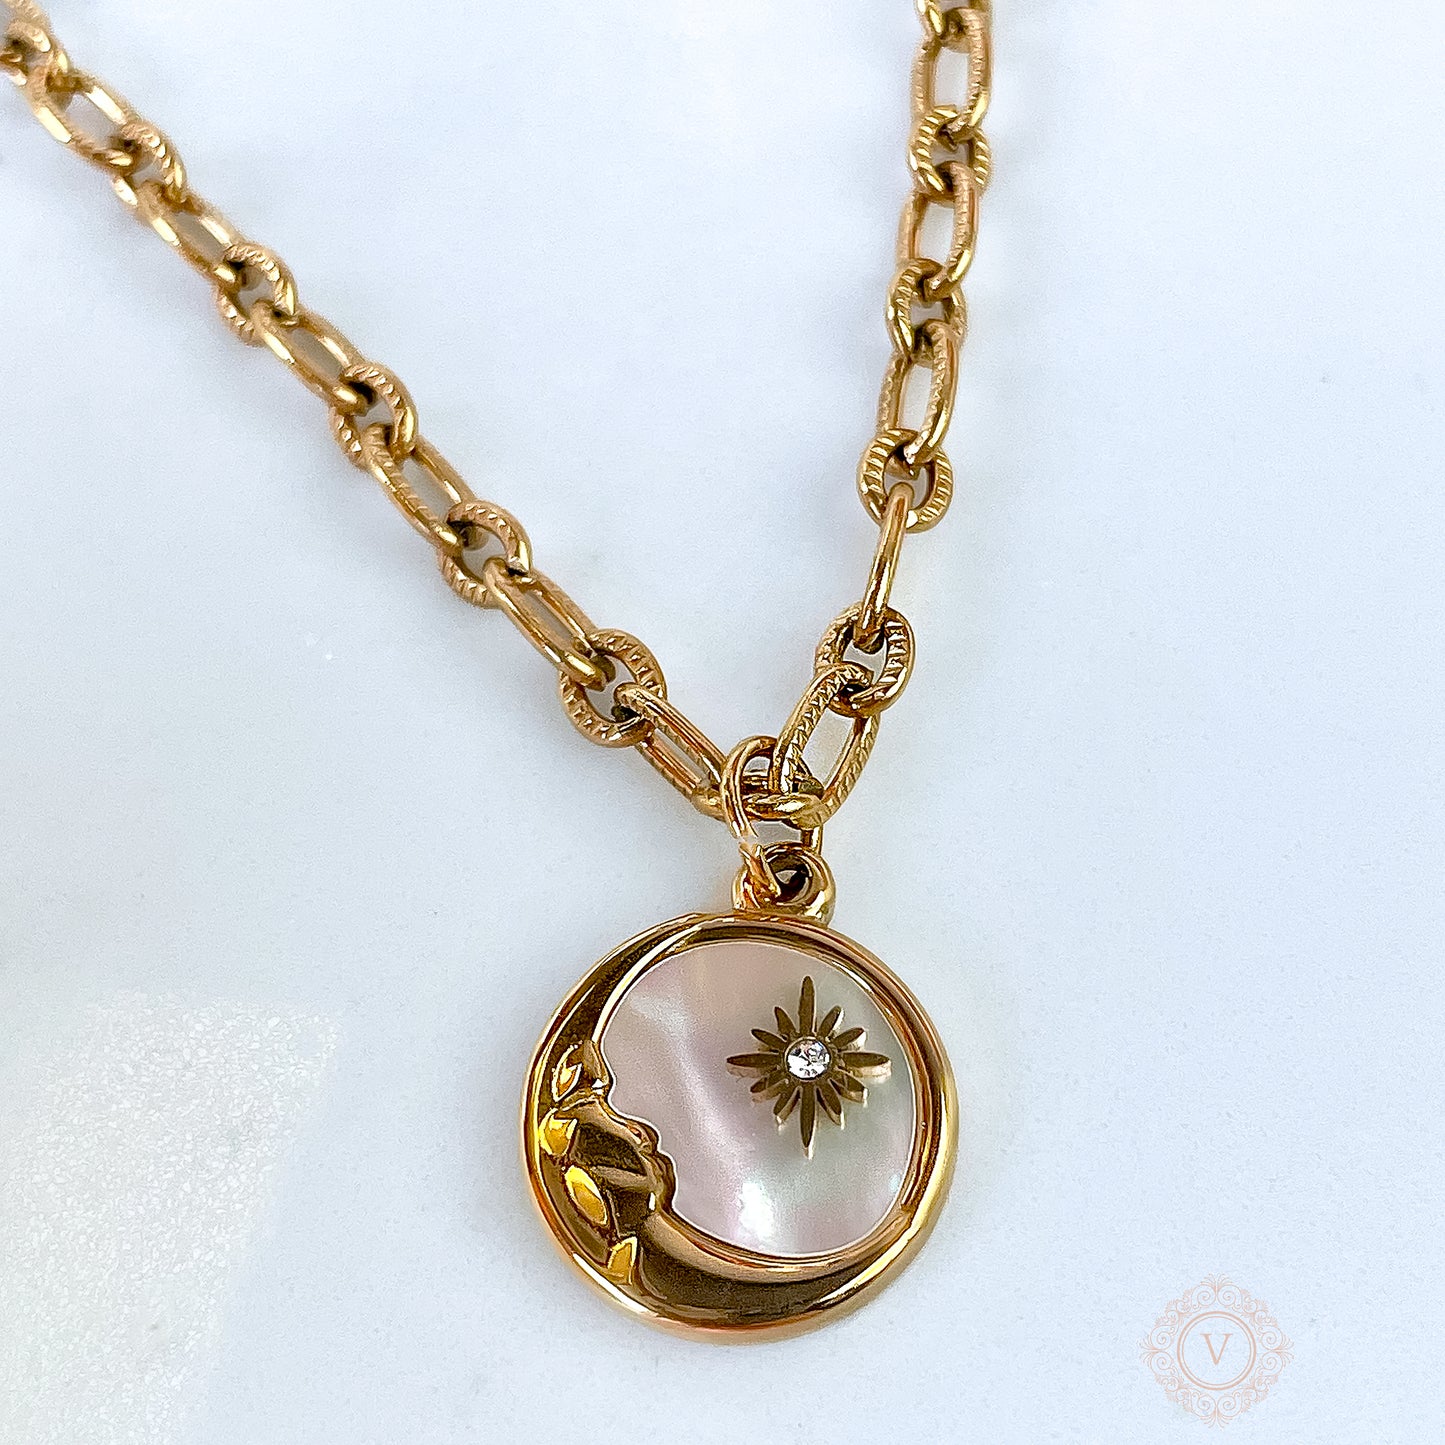 VB 18K Gold Plated Moon Pendant Necklace.